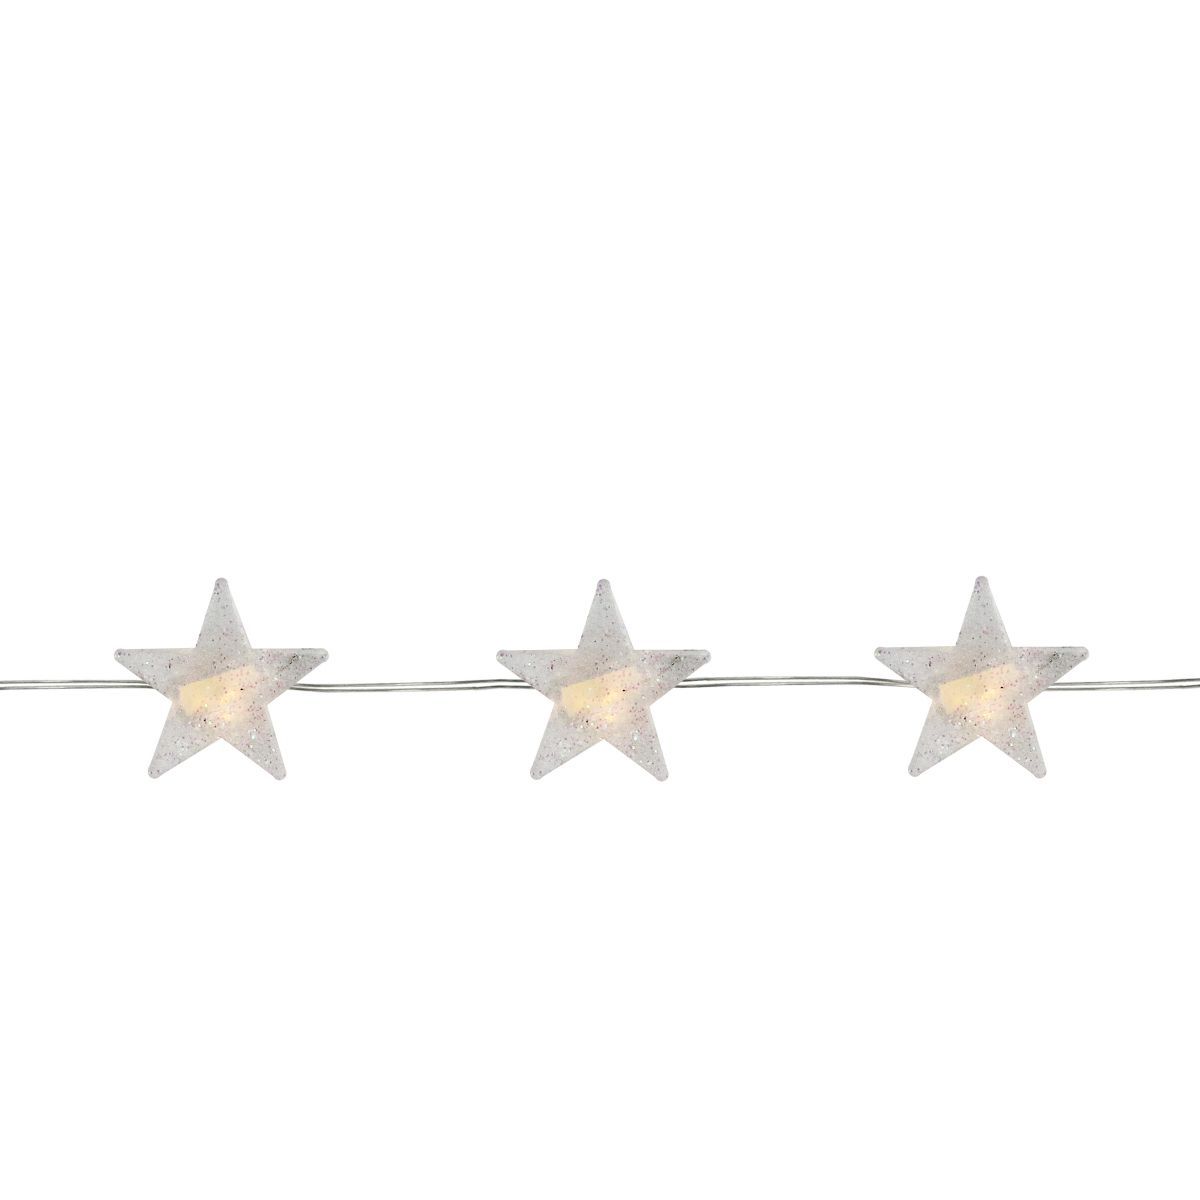 Northlight 20ct Star LED Micro Fairy Christmas Lights Warm White - 6' Copper Wire | Target